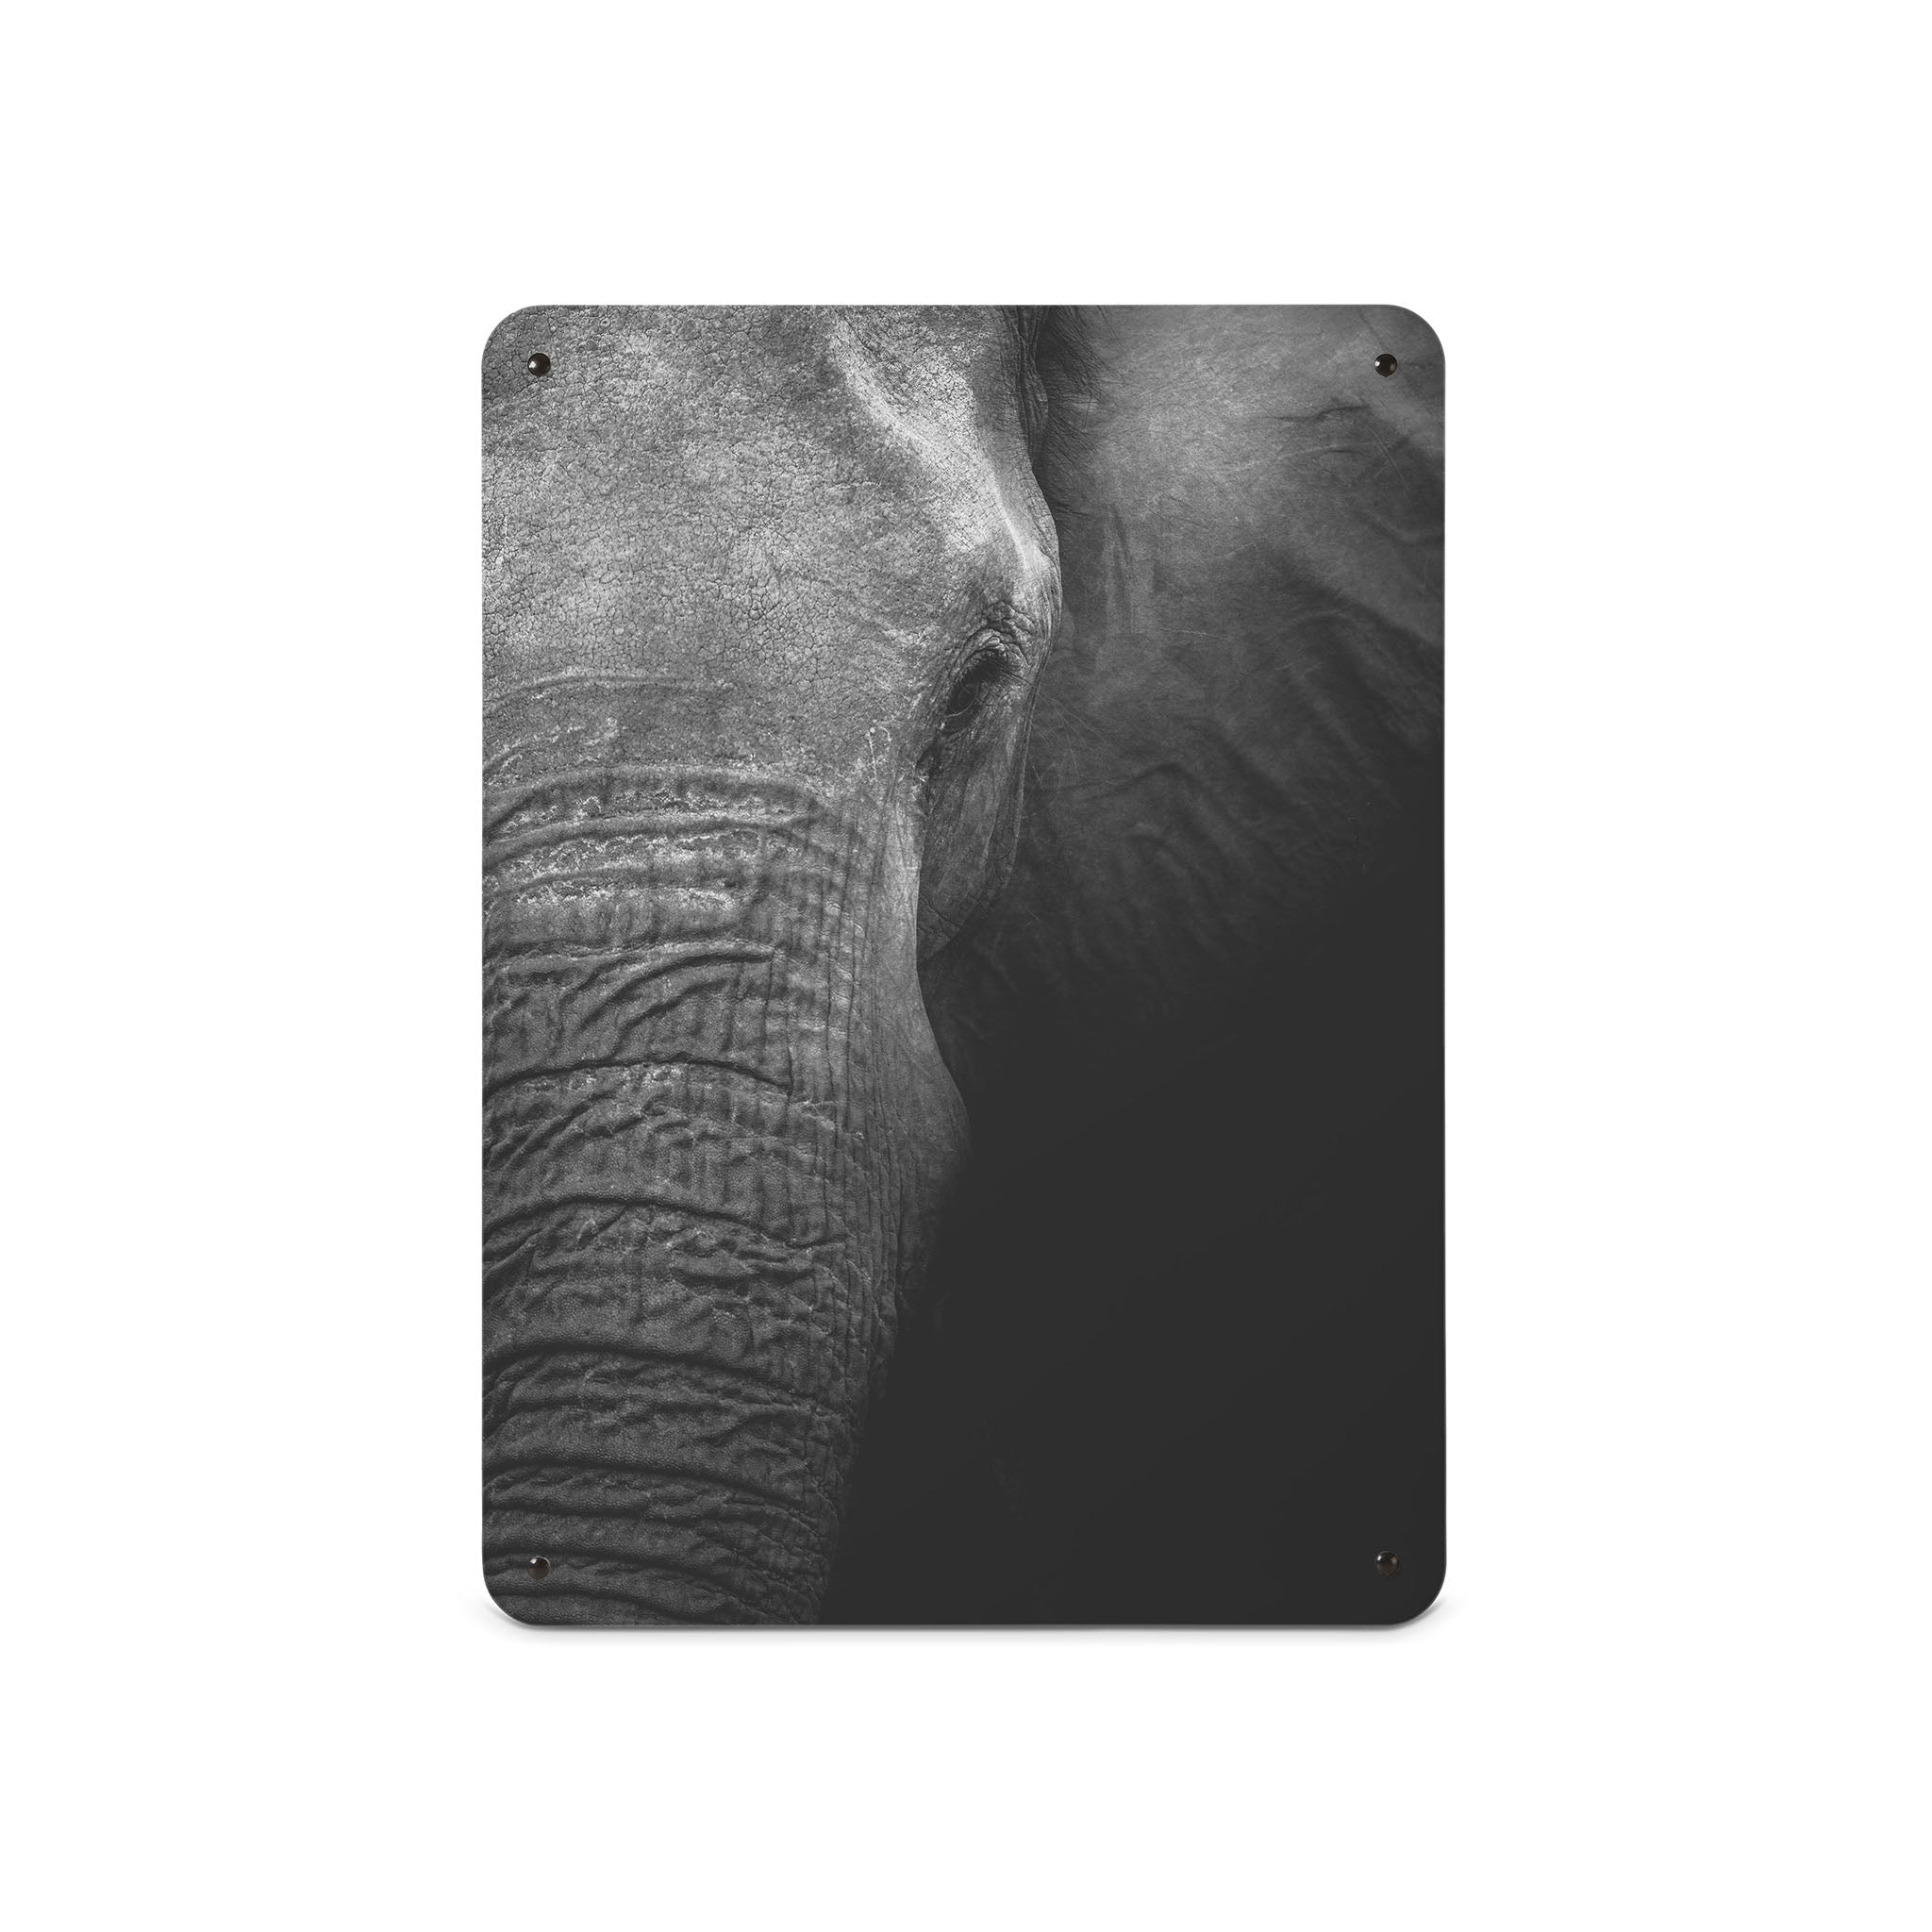 A medium magnetic notice board by Beyond the Fridge with a black and white close up photograph of the face of an elephant